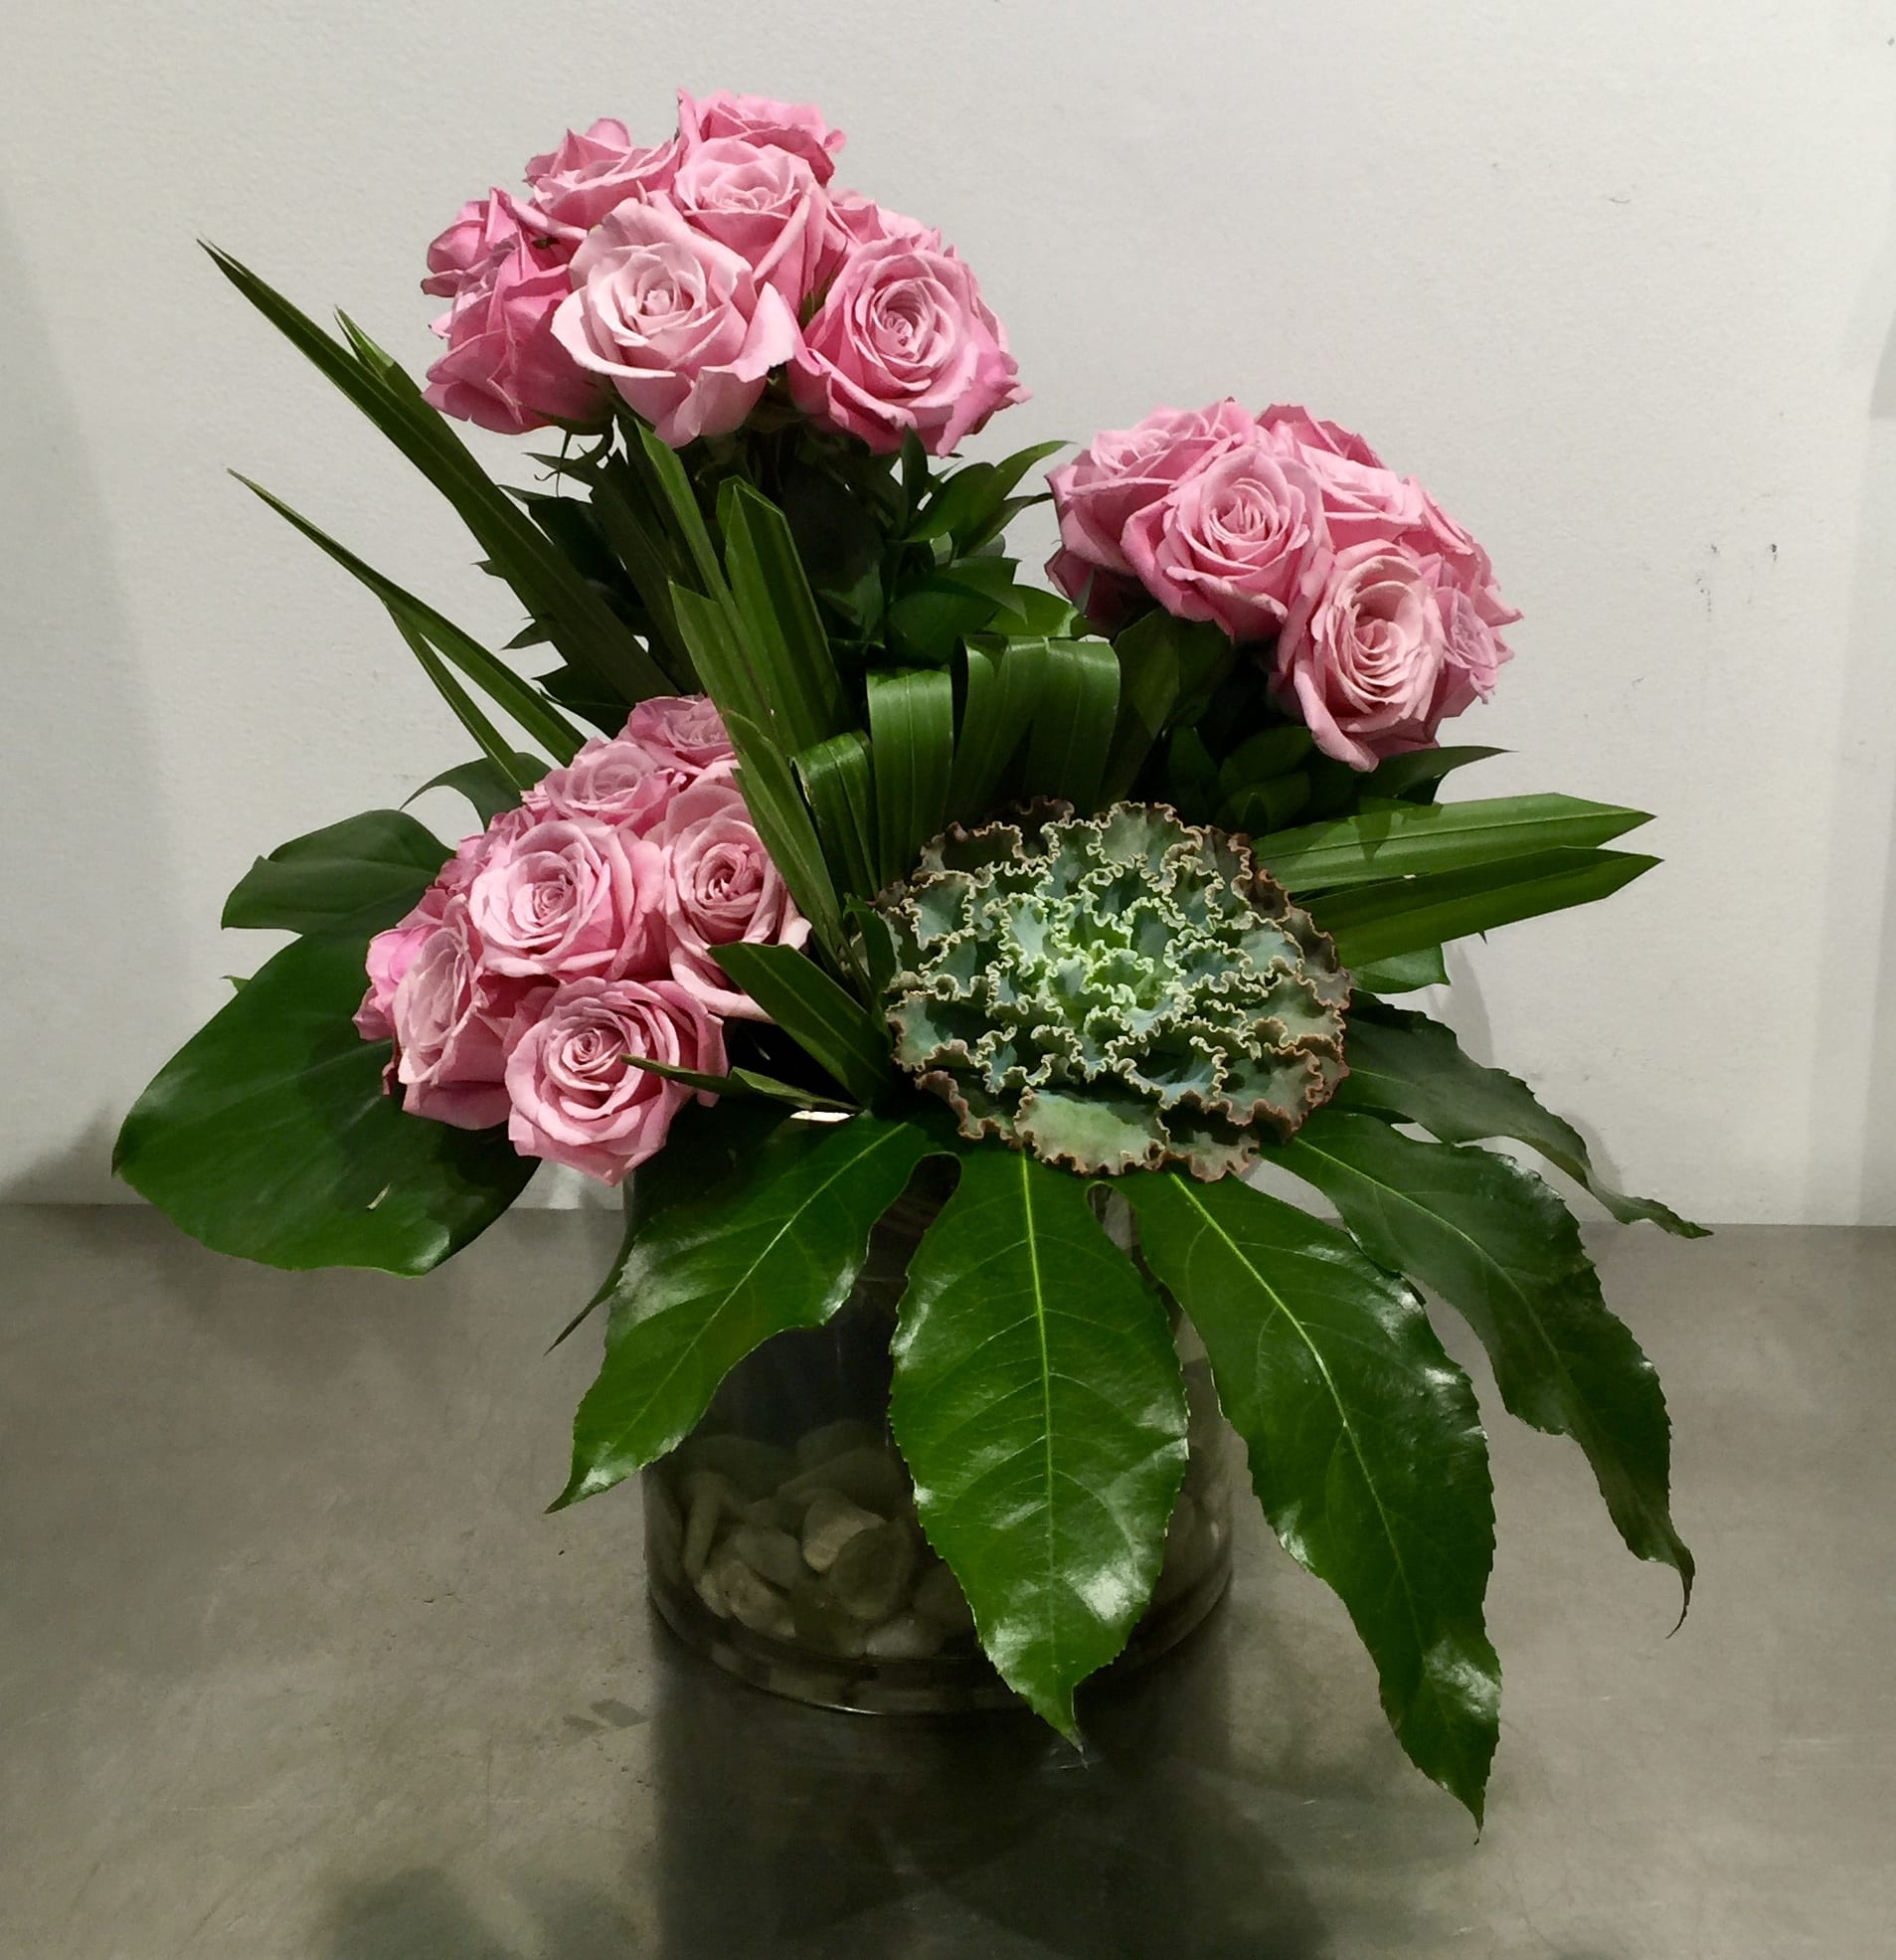 Lavender Trio - Custom arrangement of lavender roses with succulent in clear glass vase with stones.